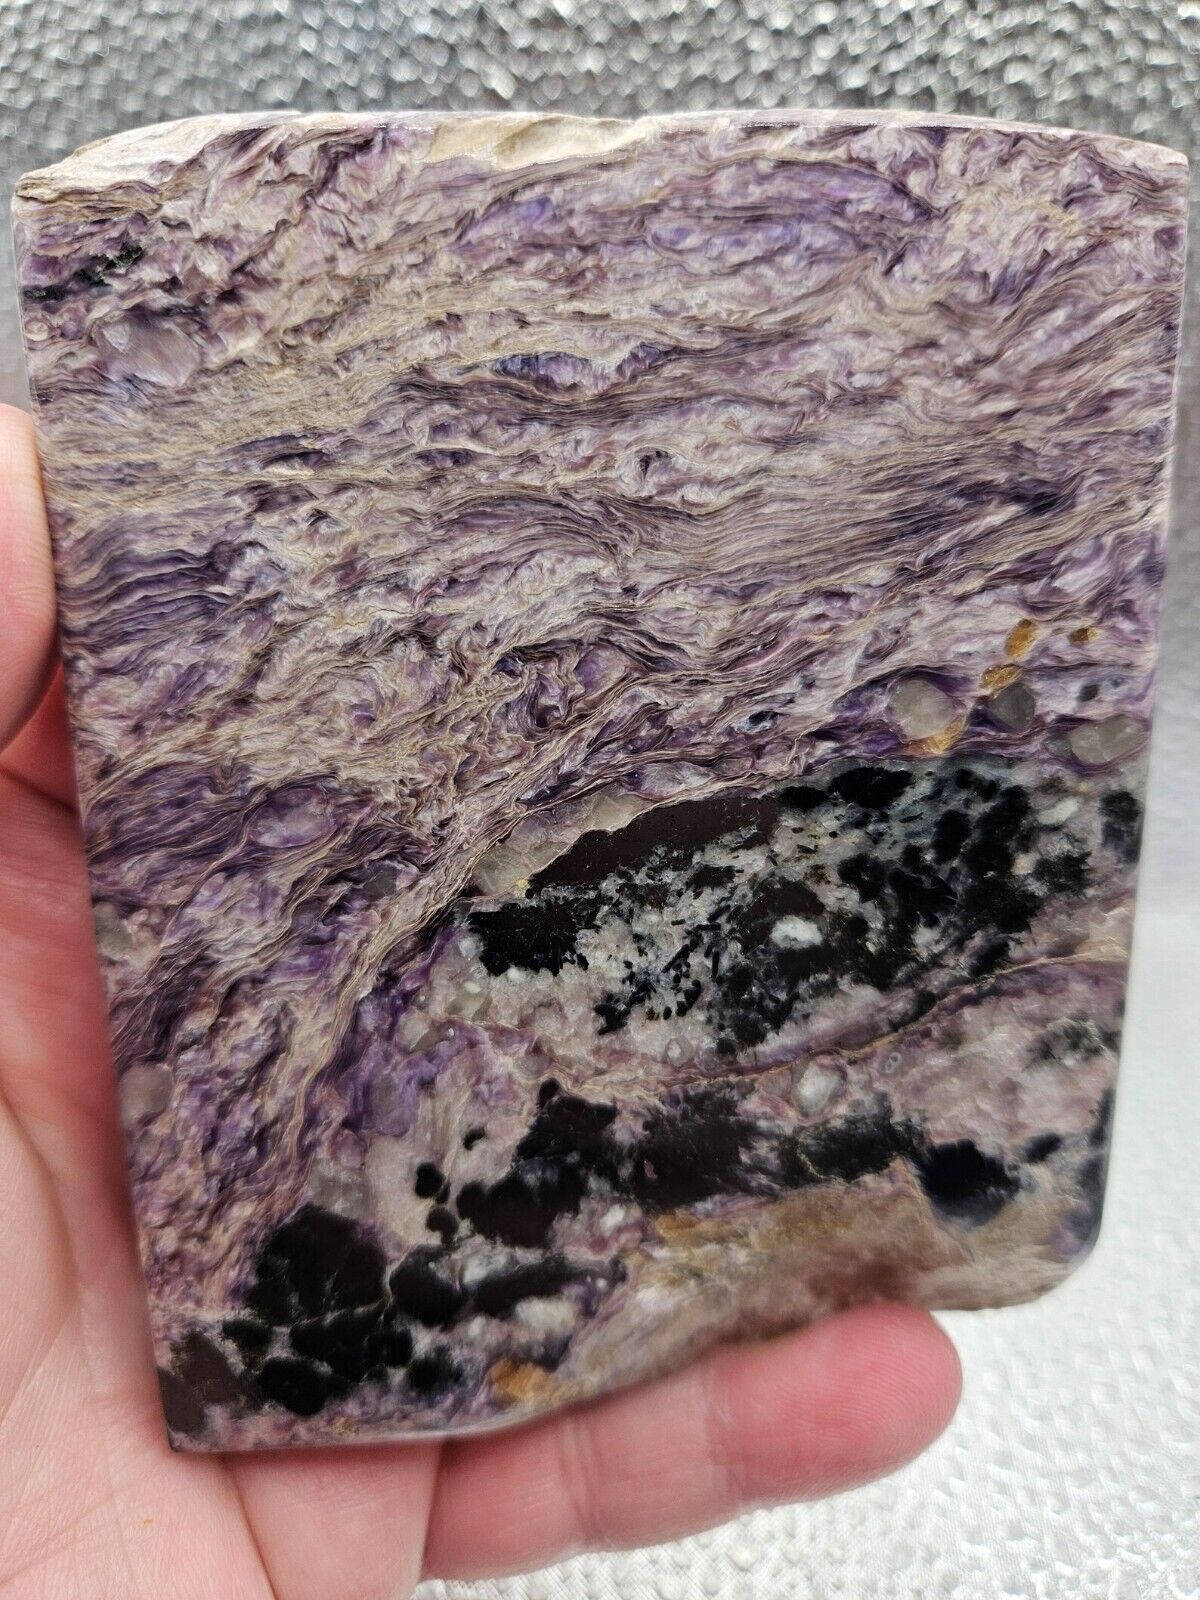 285g Charoite Rough Mineral Polished Specimen High Quality Yakutia-Russia